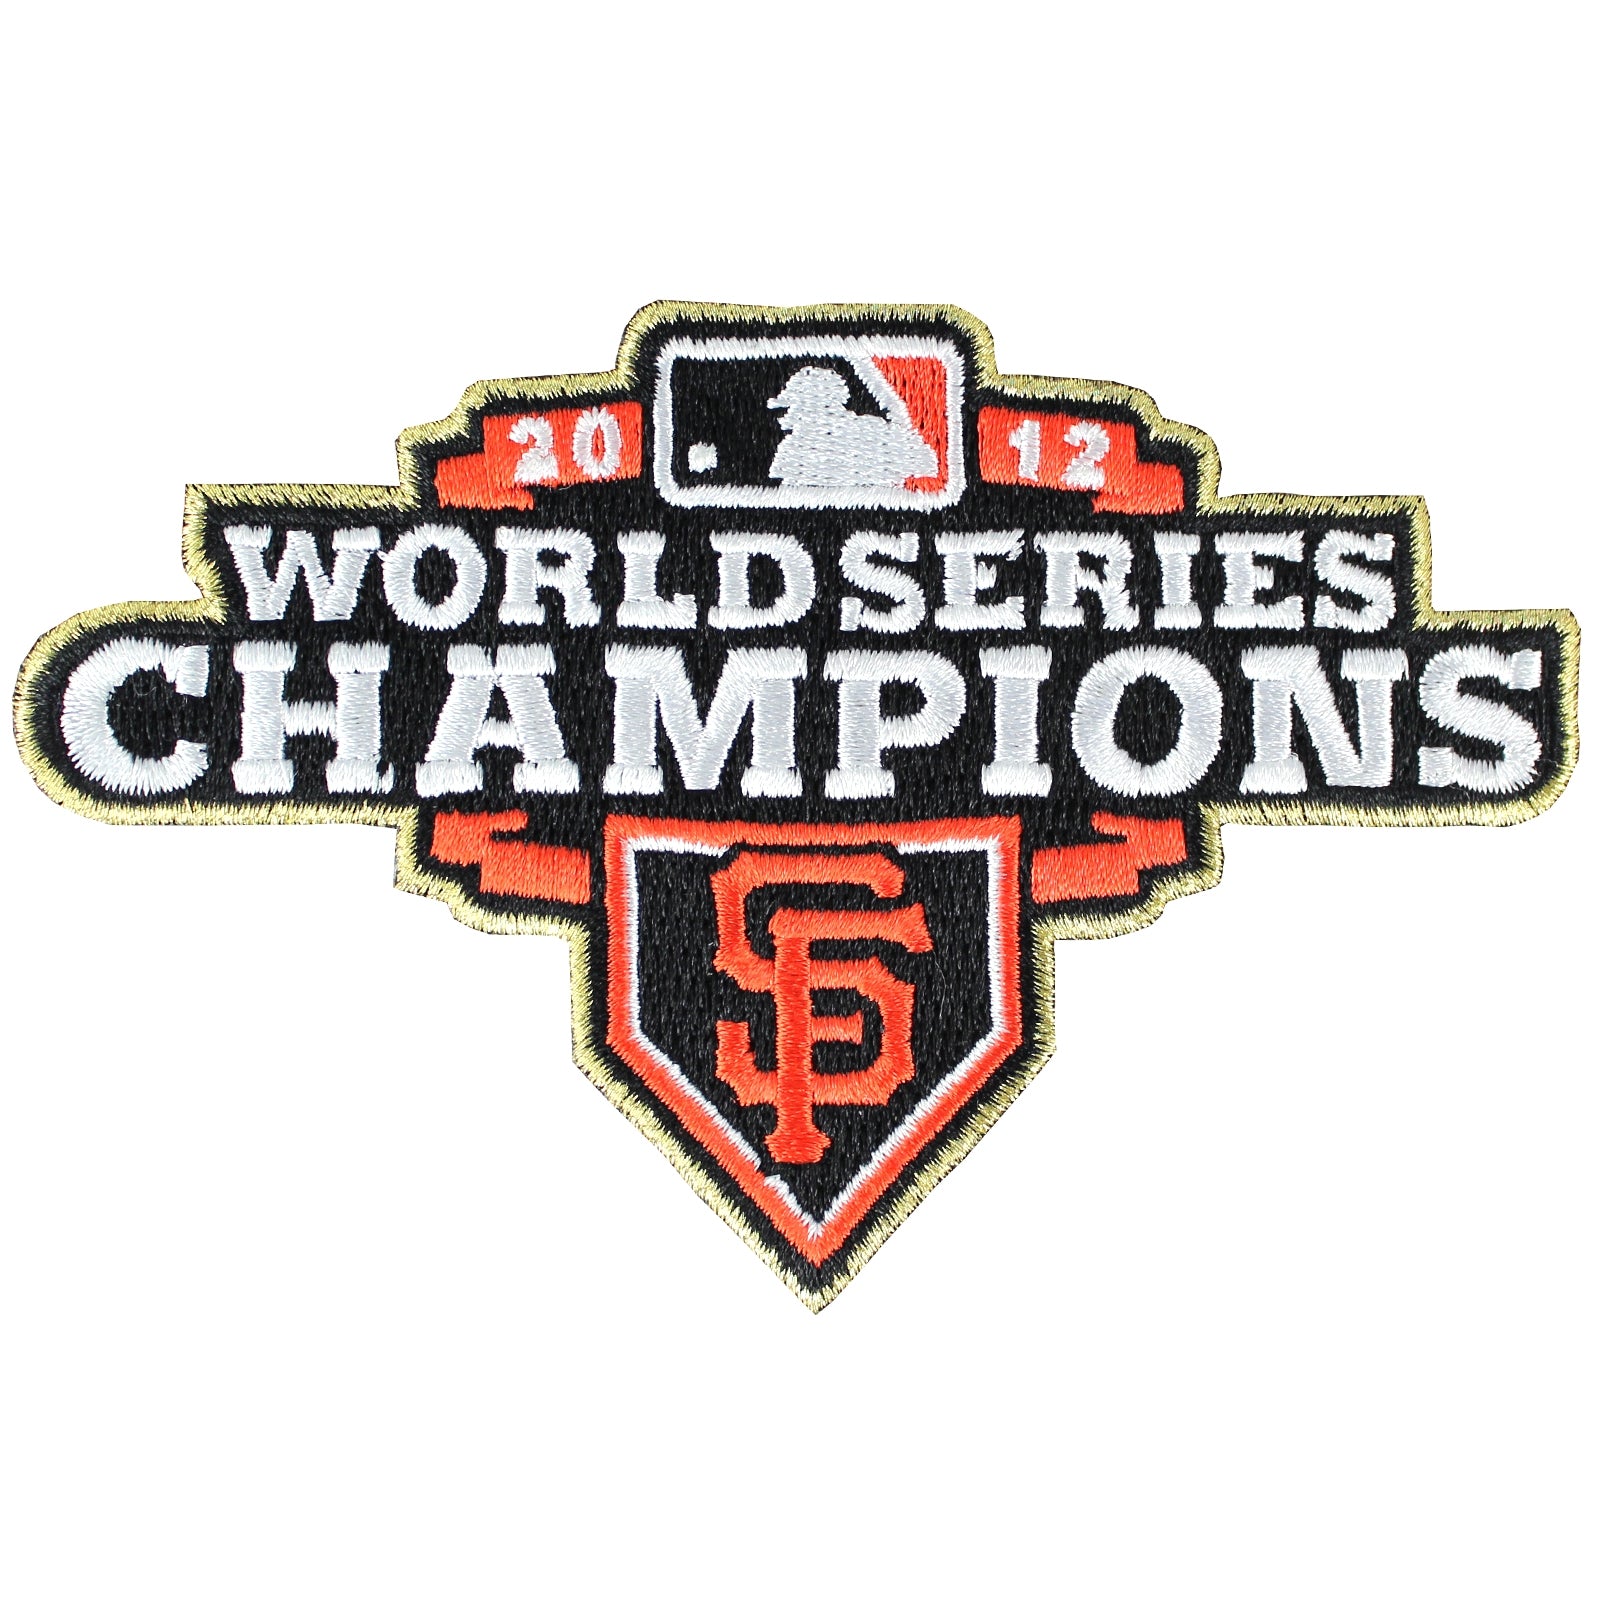 series champions patch